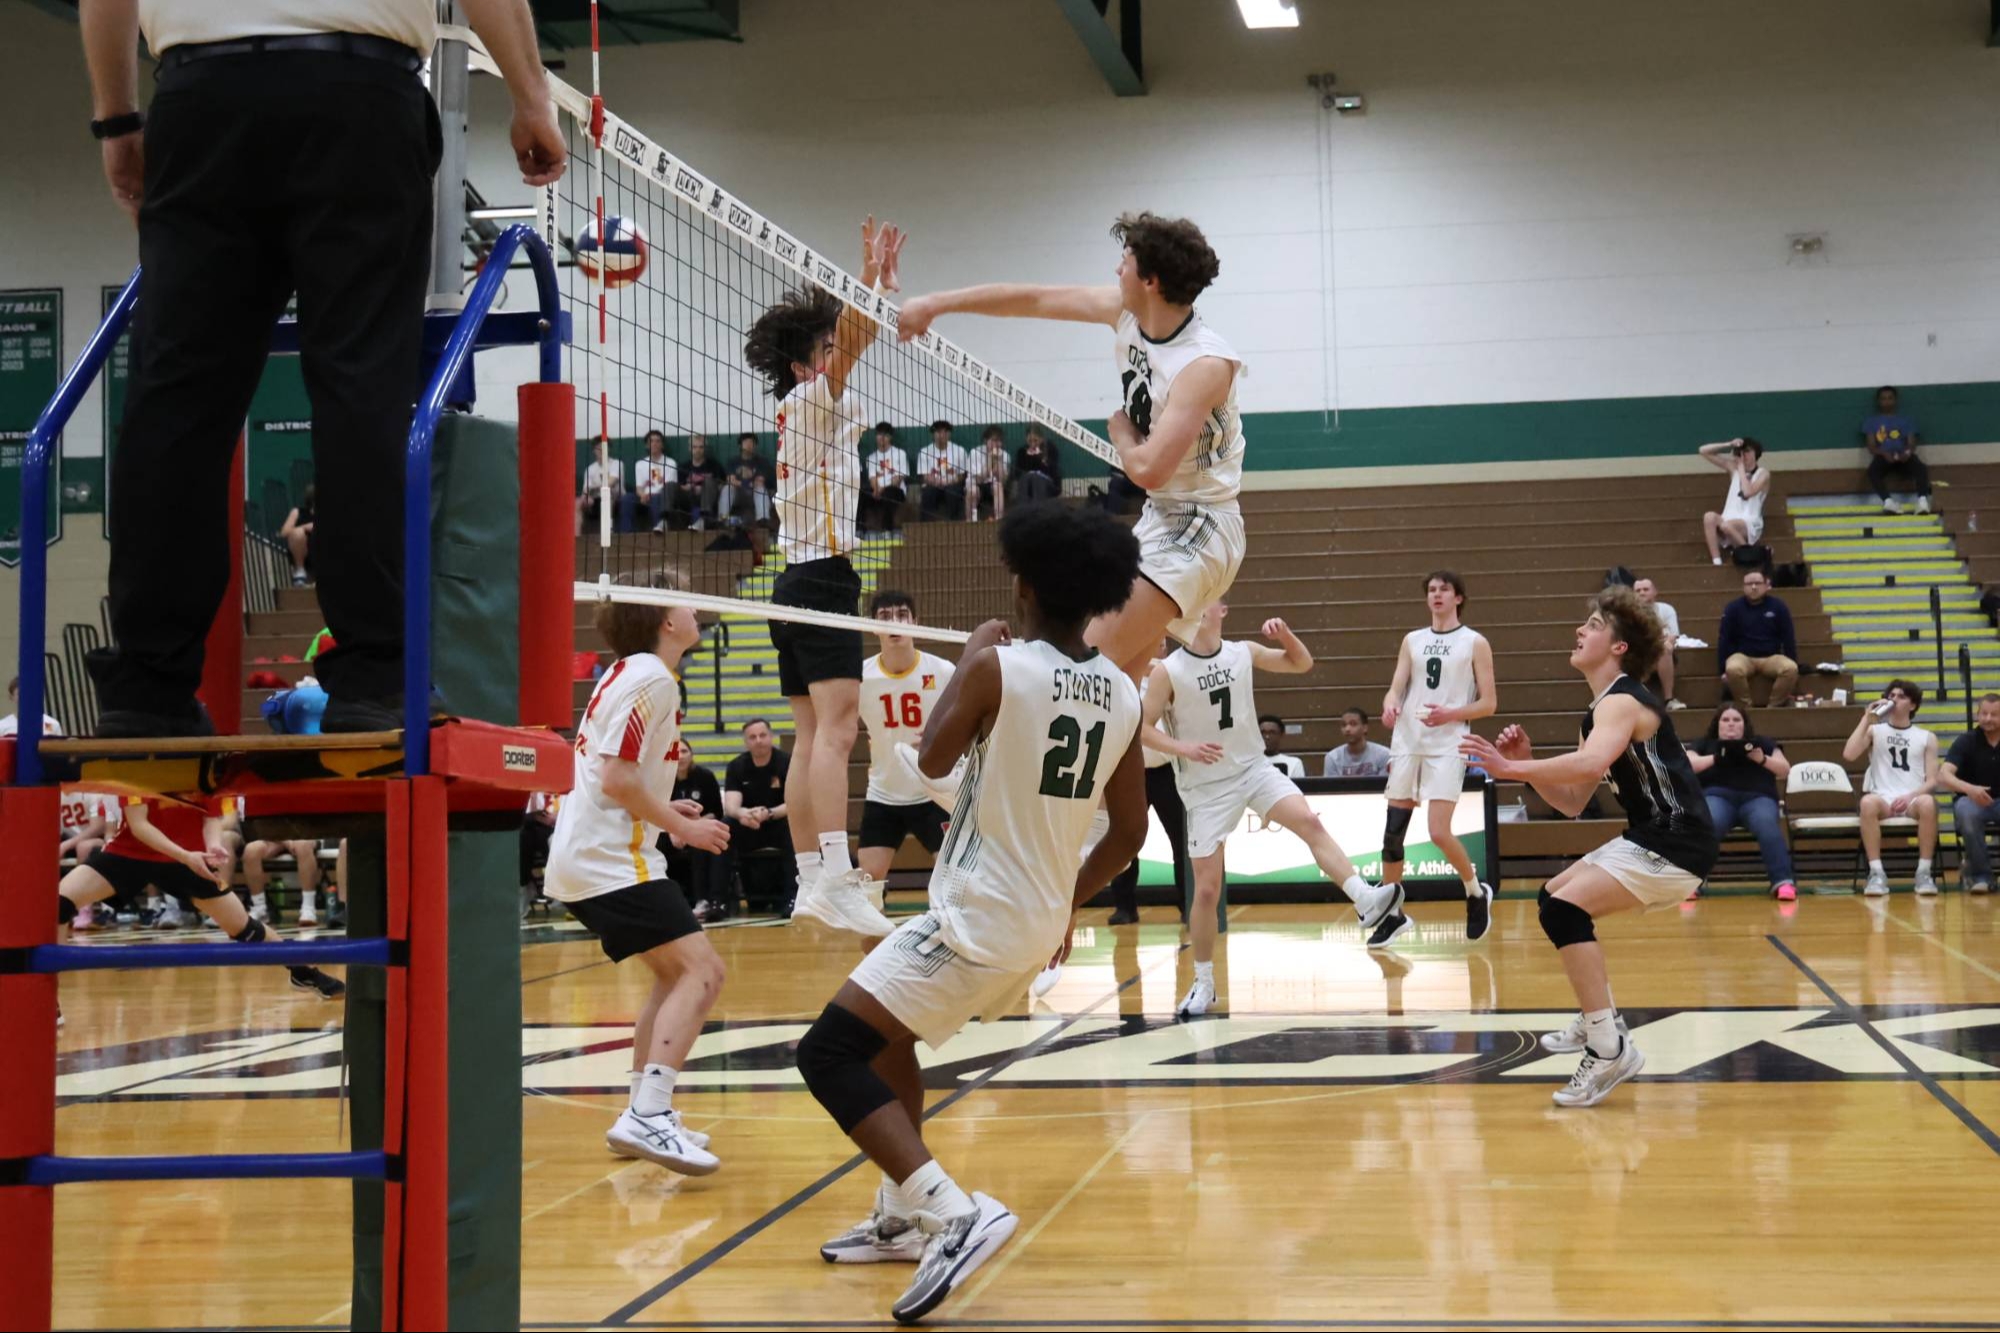 Boys Volleyball vs. Haverford HS - Content Image for demo43500_bigteams_com